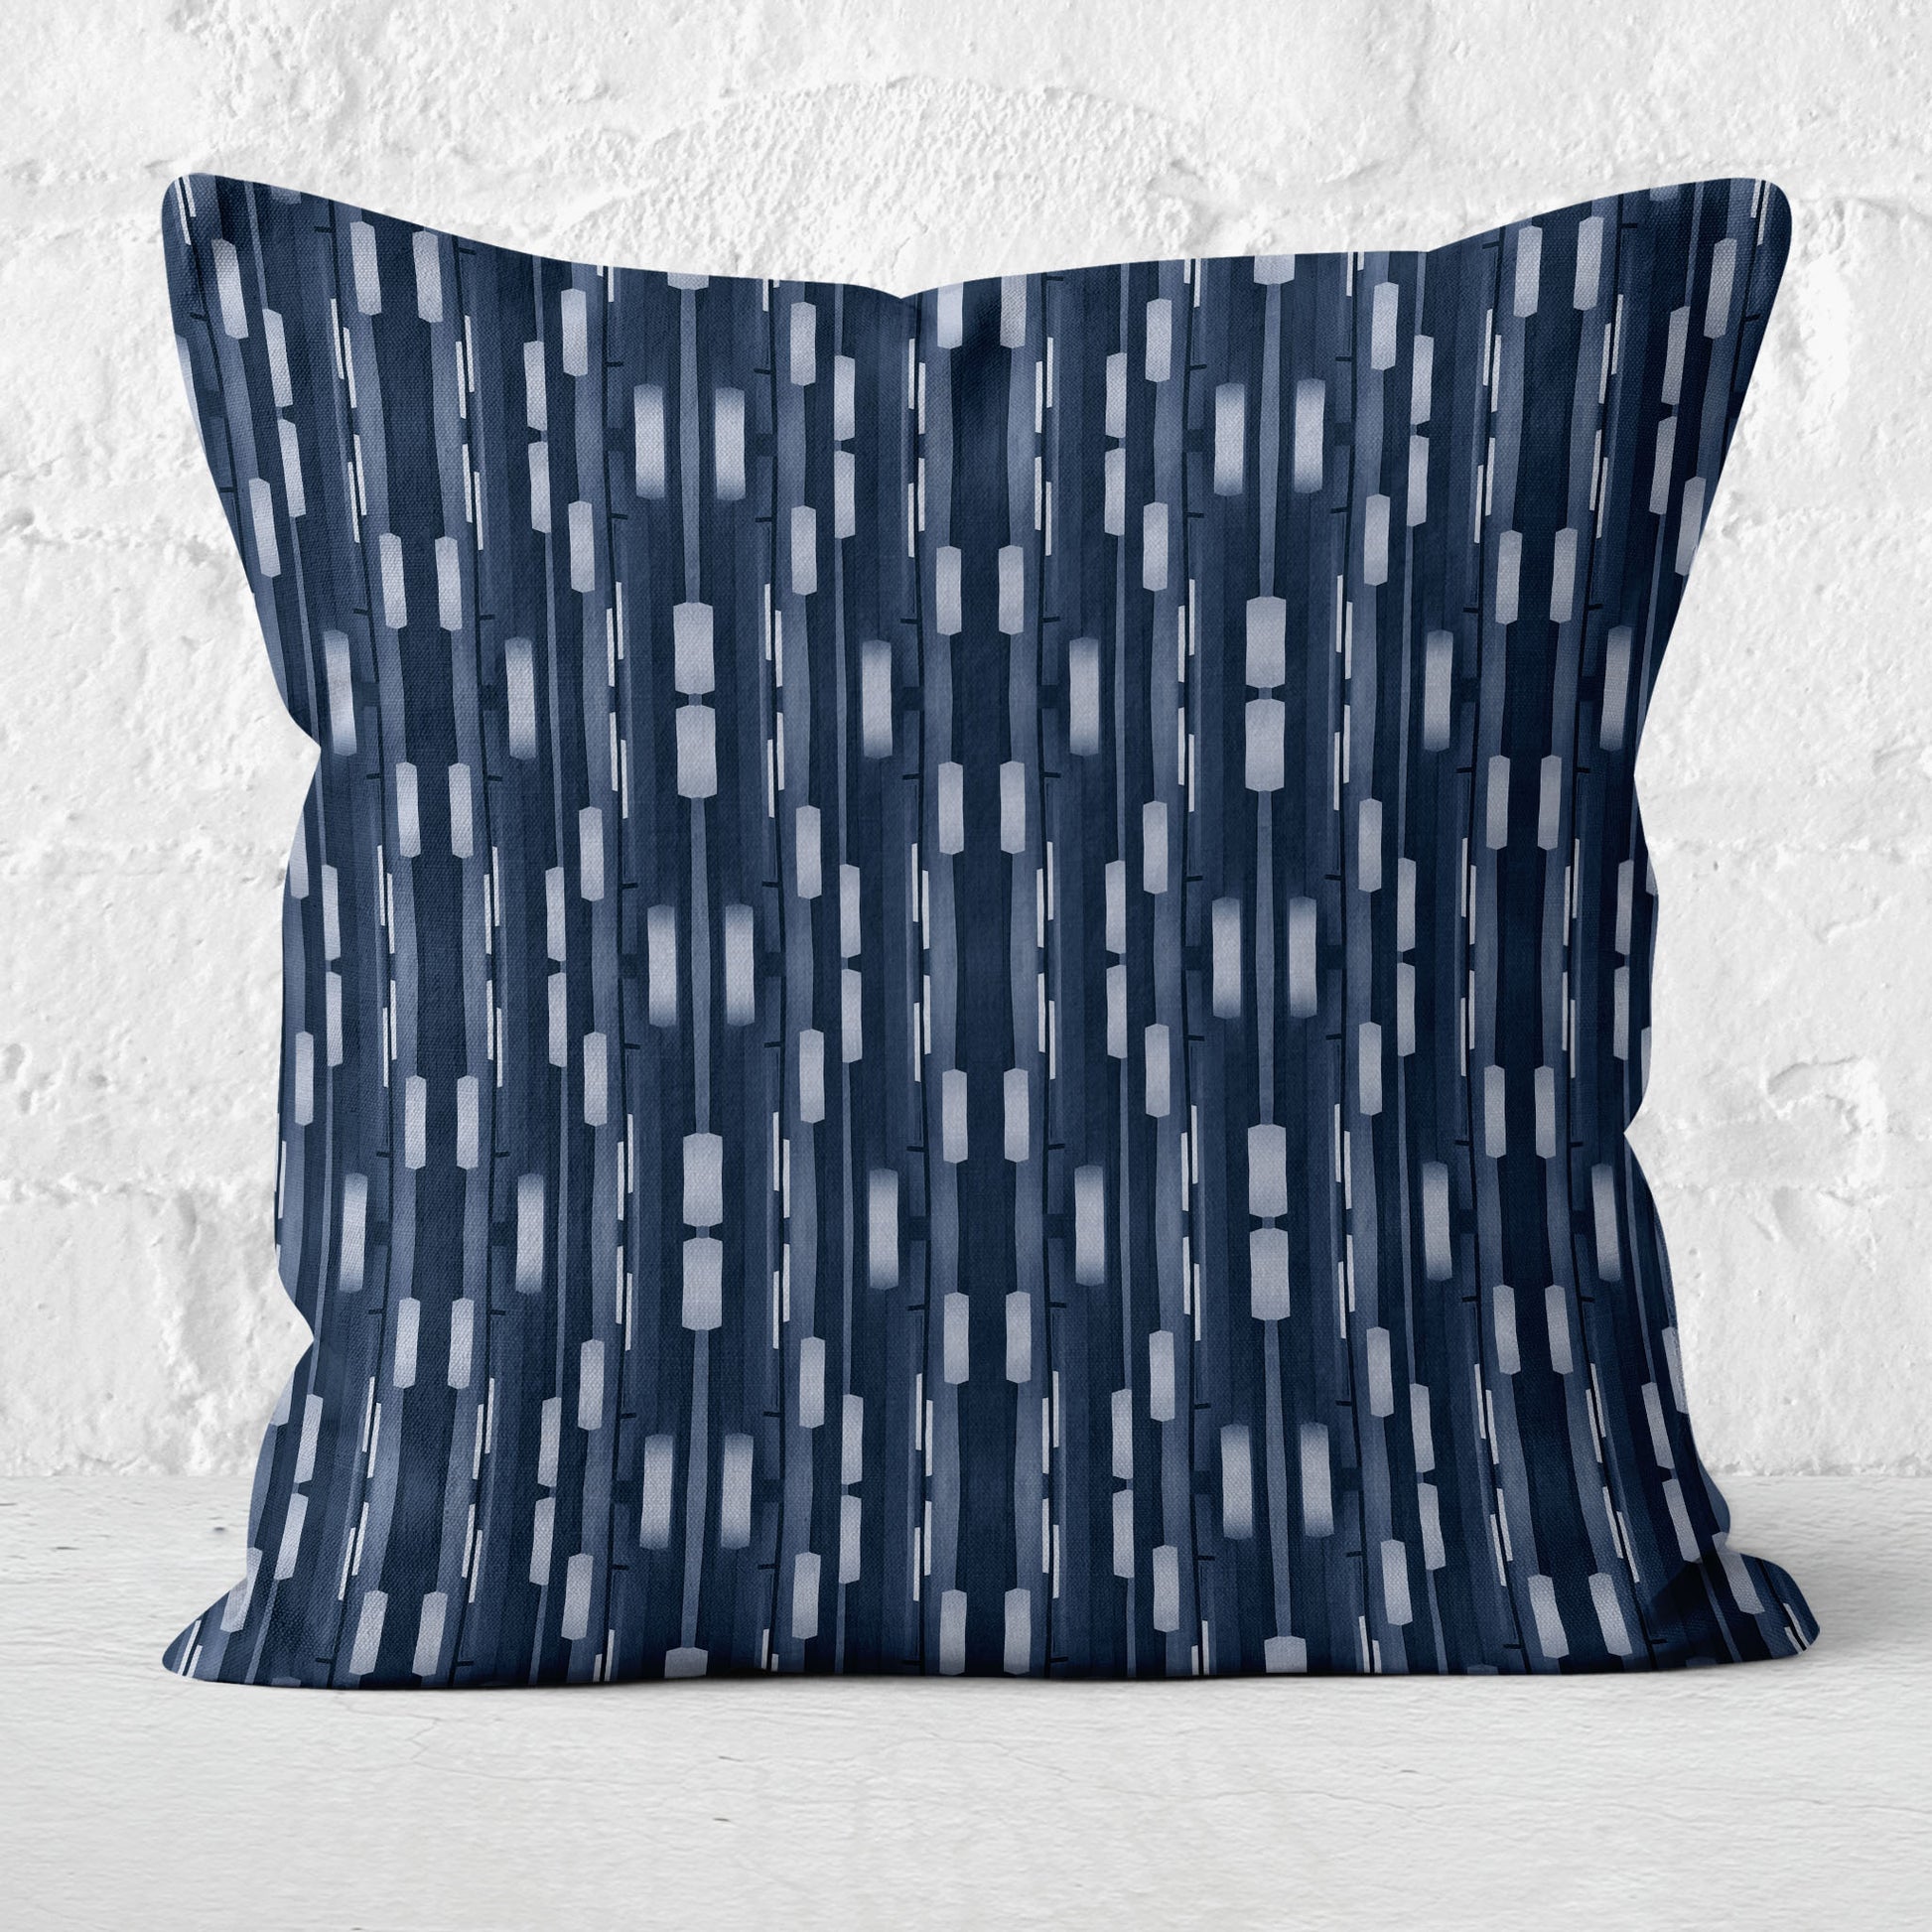 Pillow featuring collaged stripe pattern in blue and white with a white brick wall in background